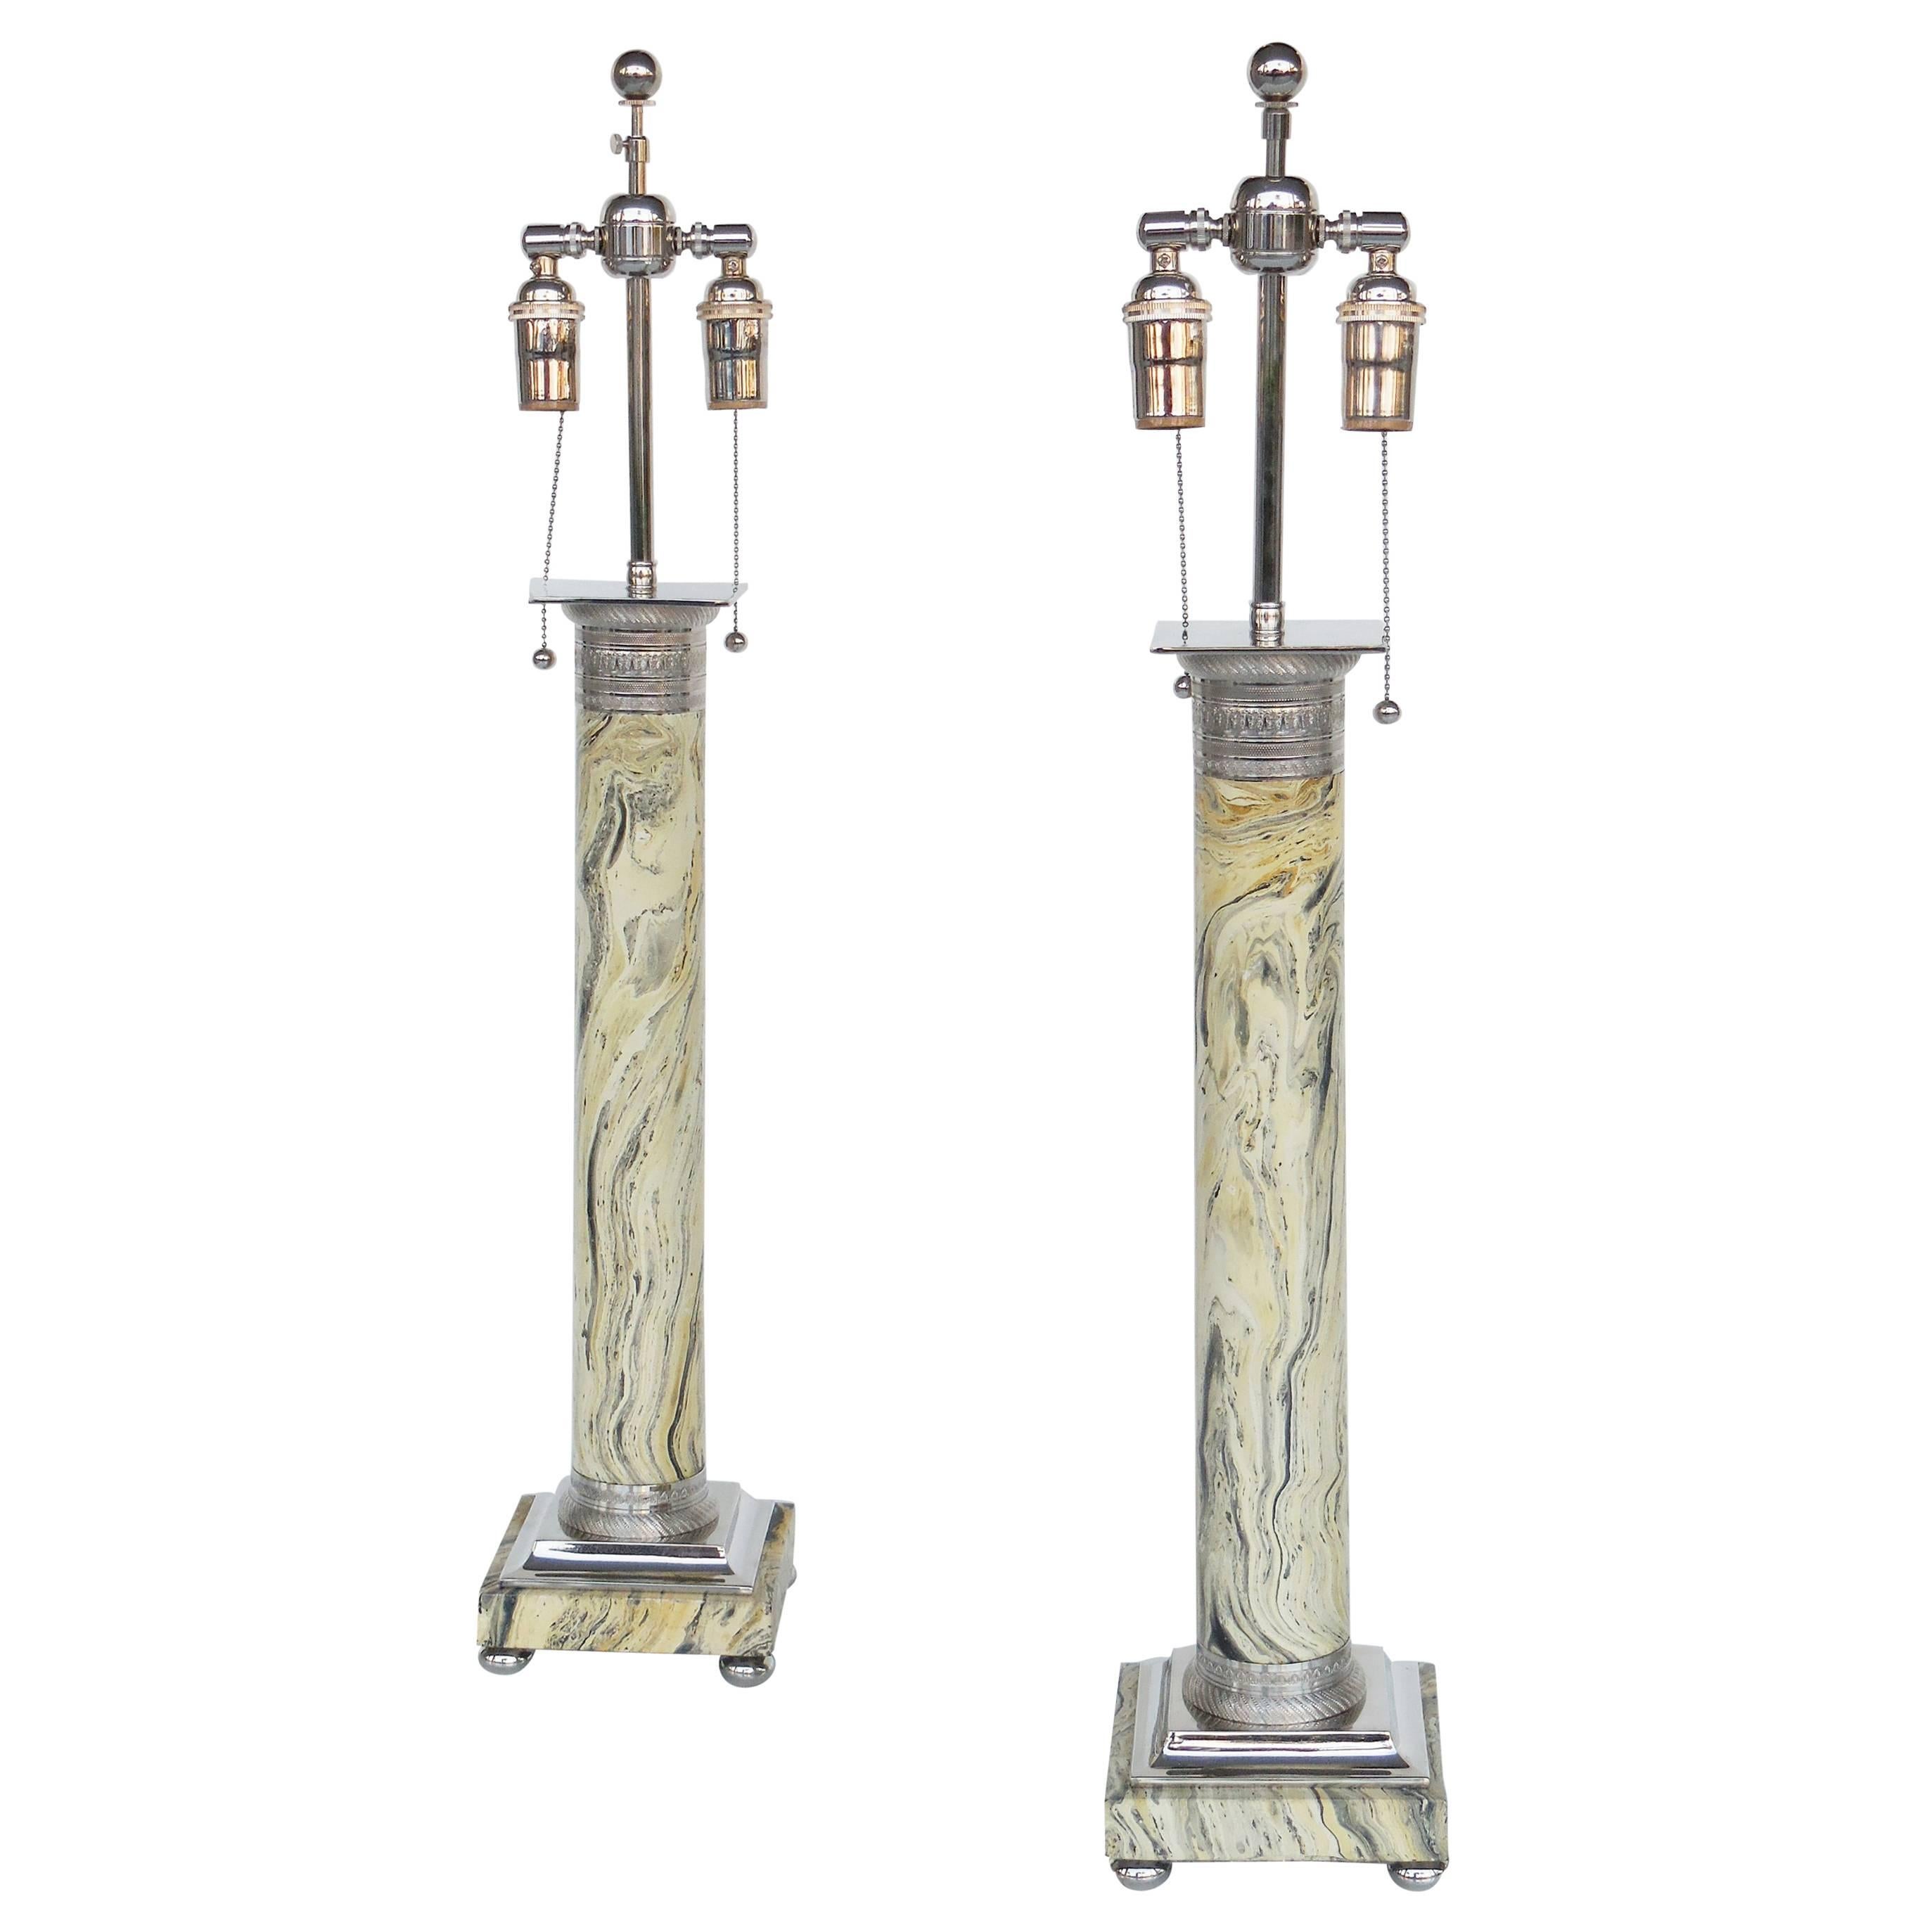 Pair of Neoclassical Faux Marble and Nickel Column Lamps